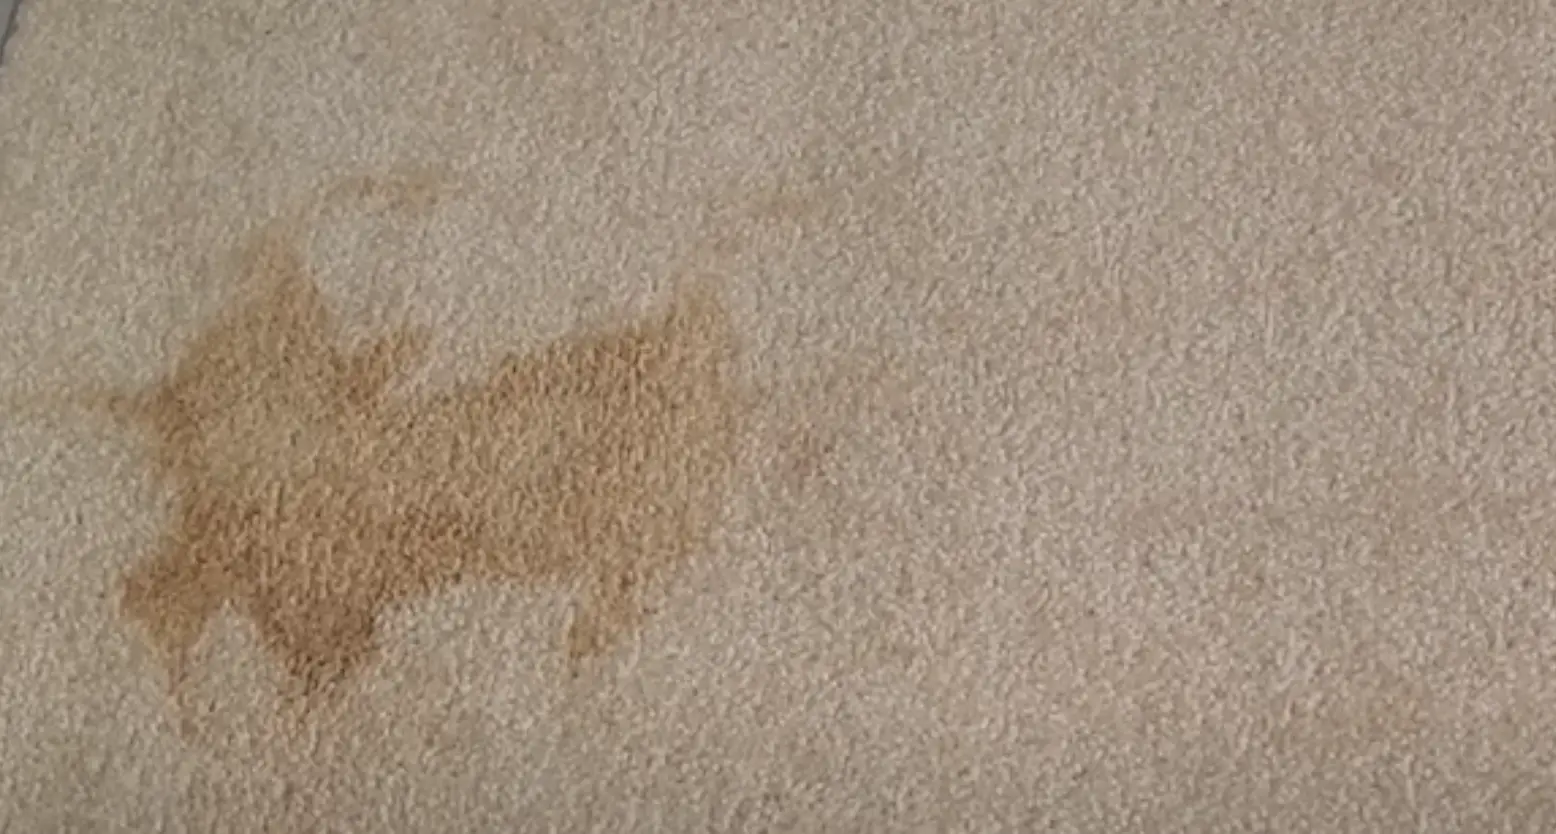 remove coffee stain on carpet